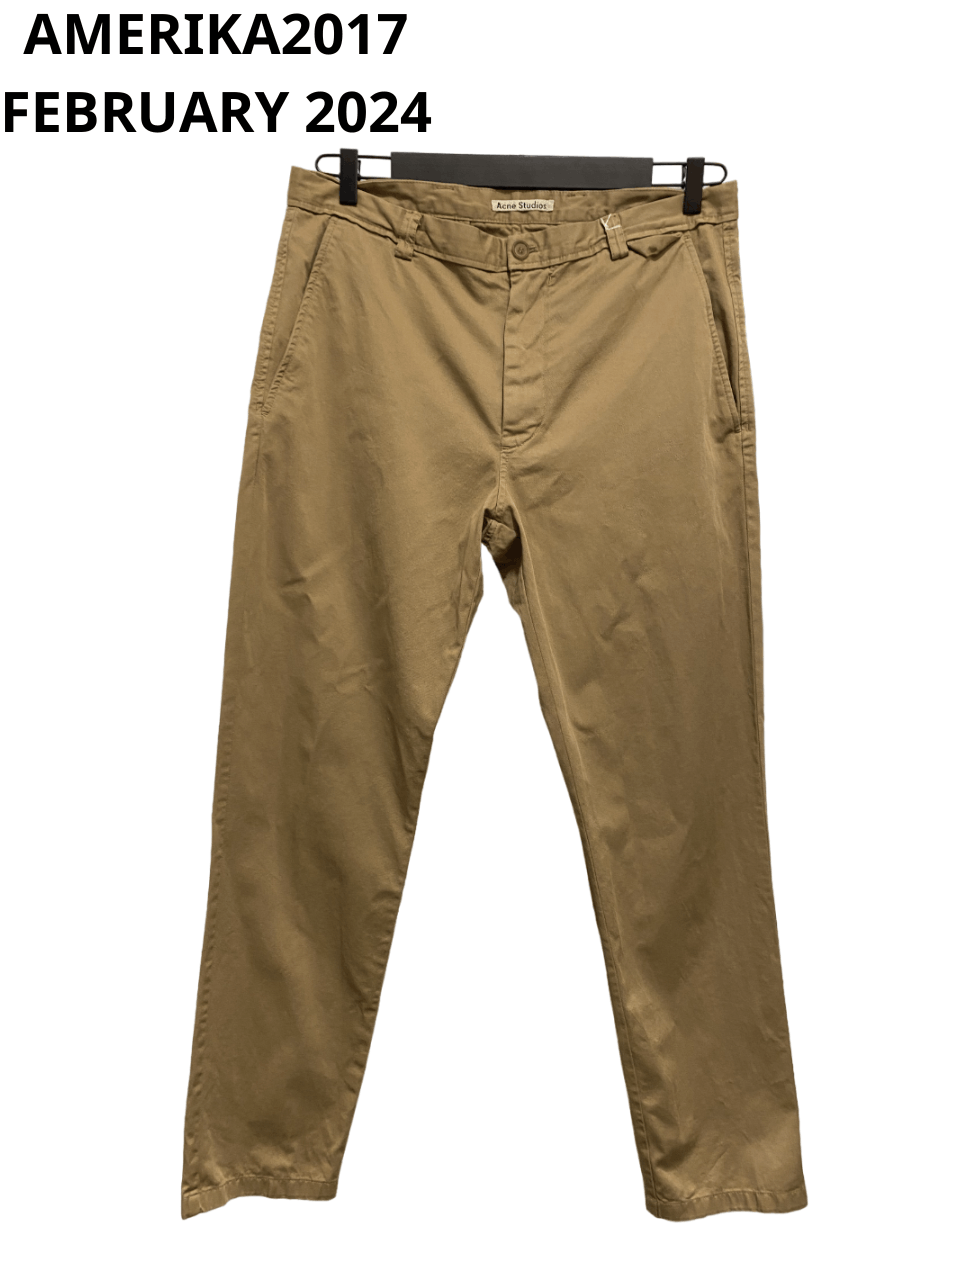 image of Acne Studios Causal Pants Size 52 in Camel, Men's